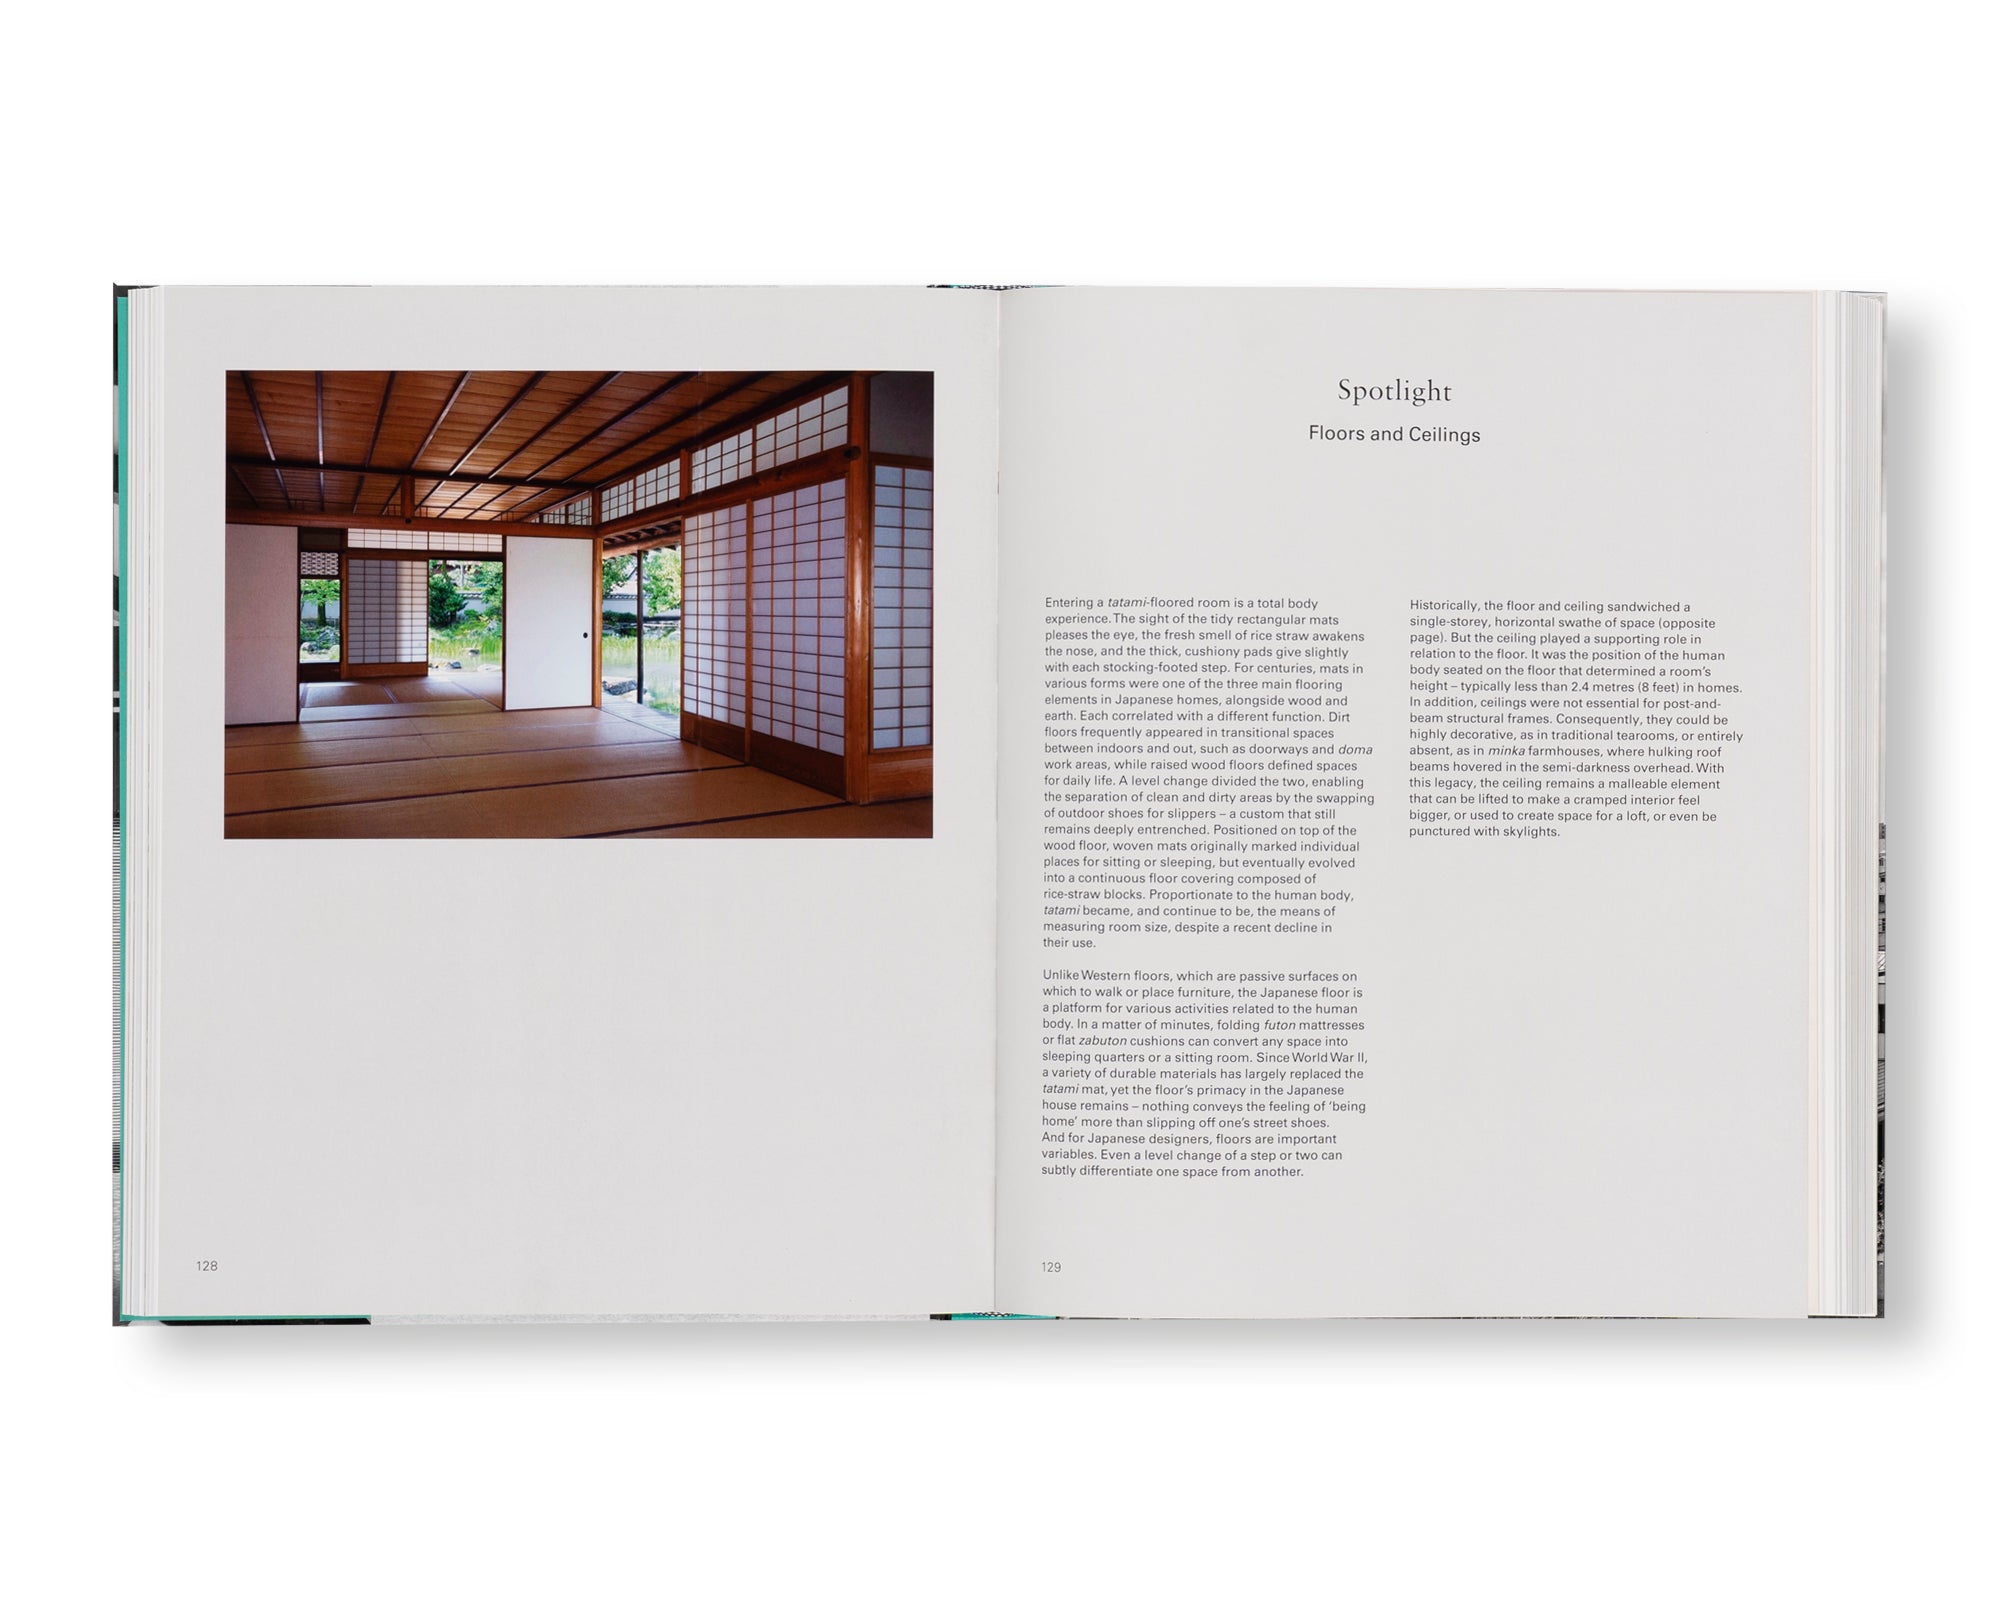 THE JAPANESE HOUSE SINCE 1945 by Naomi Pollock